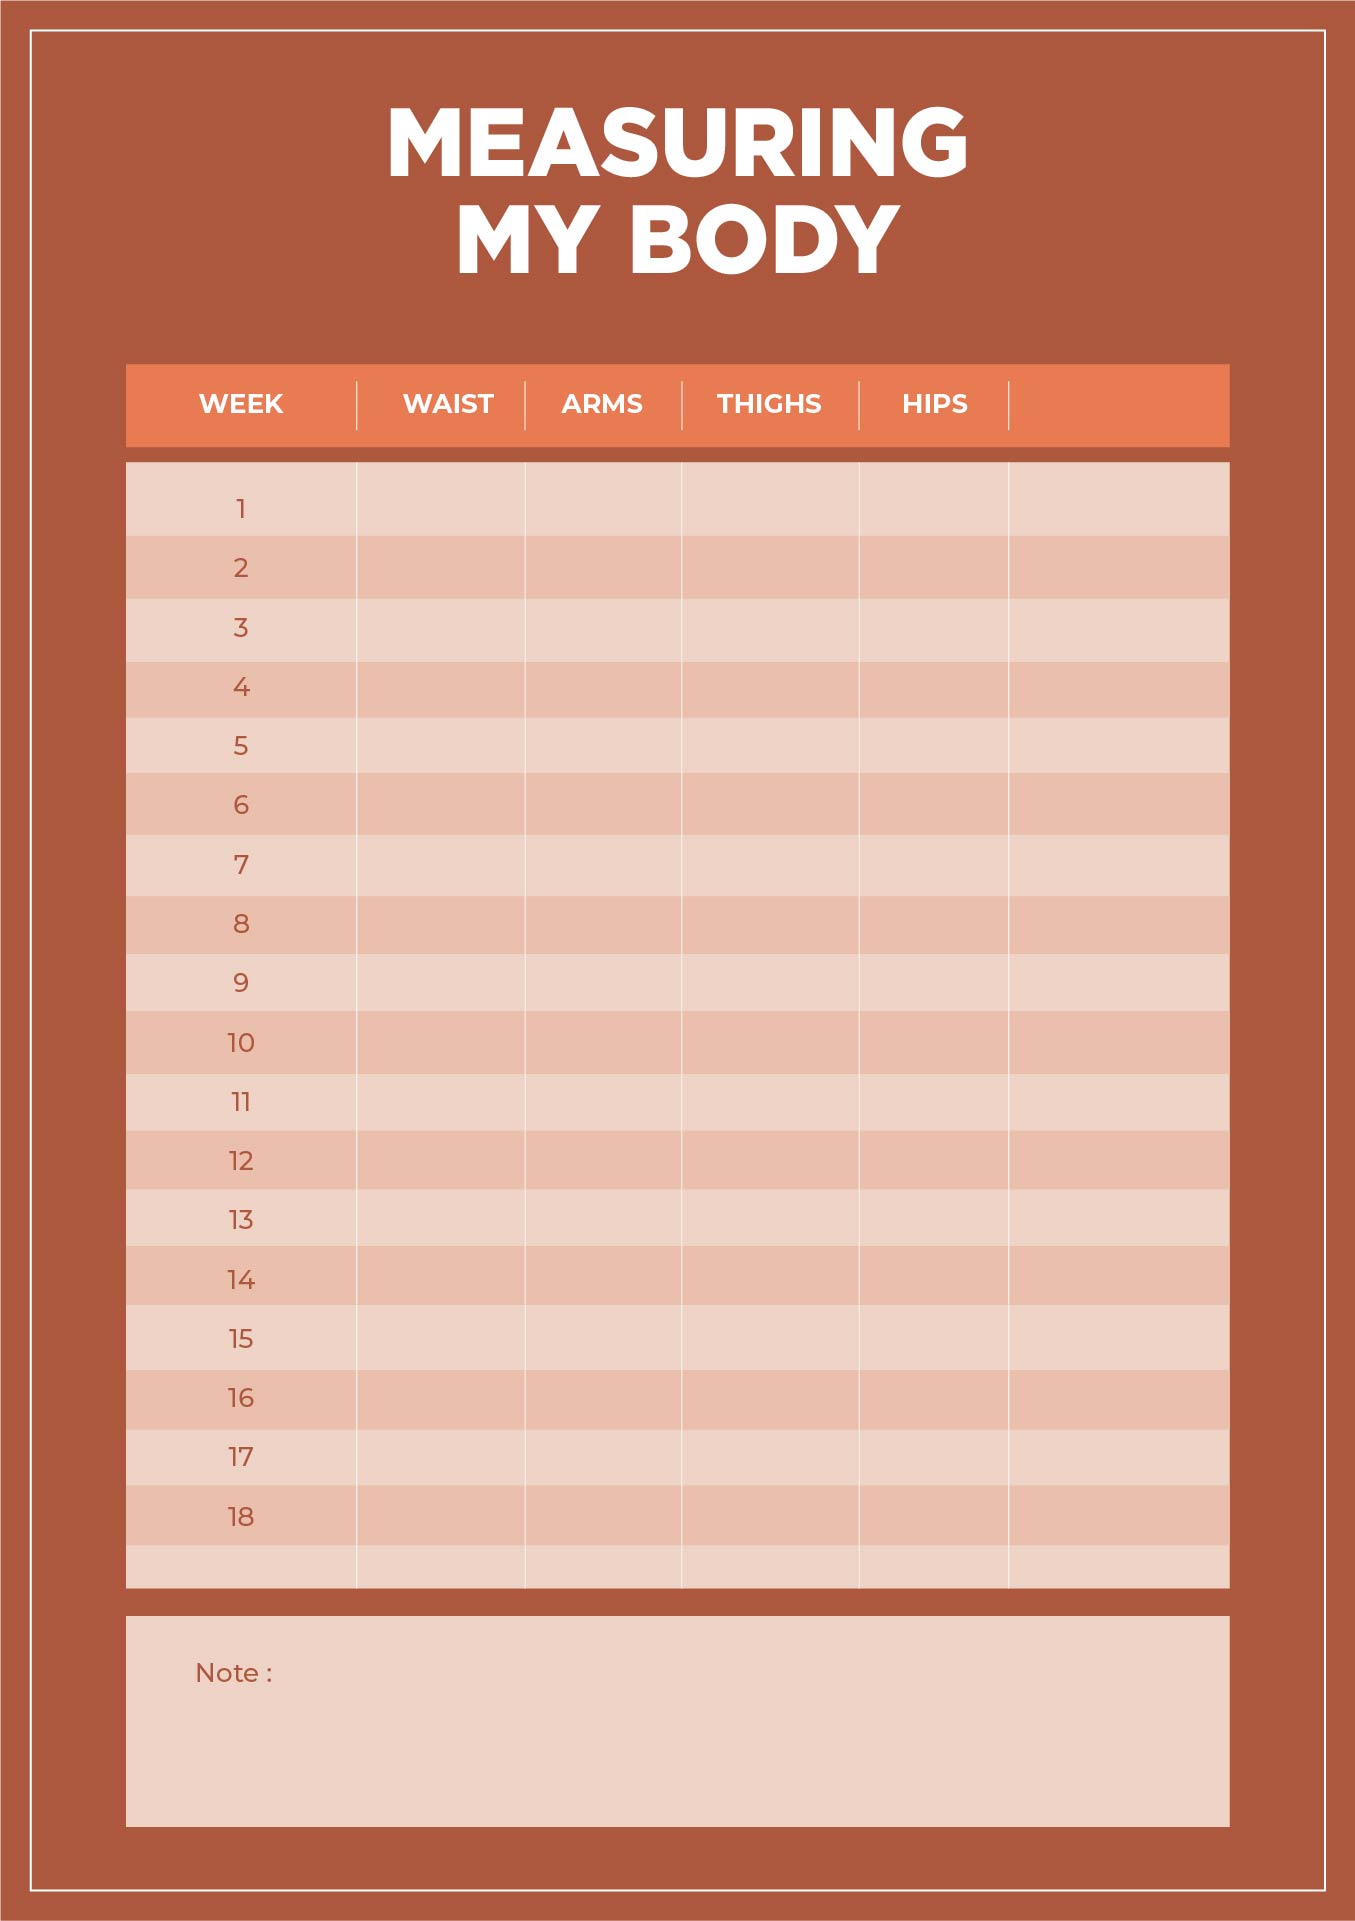 8 Best Images of Daily Weight Chart Printable - Printable Daily Weight ...